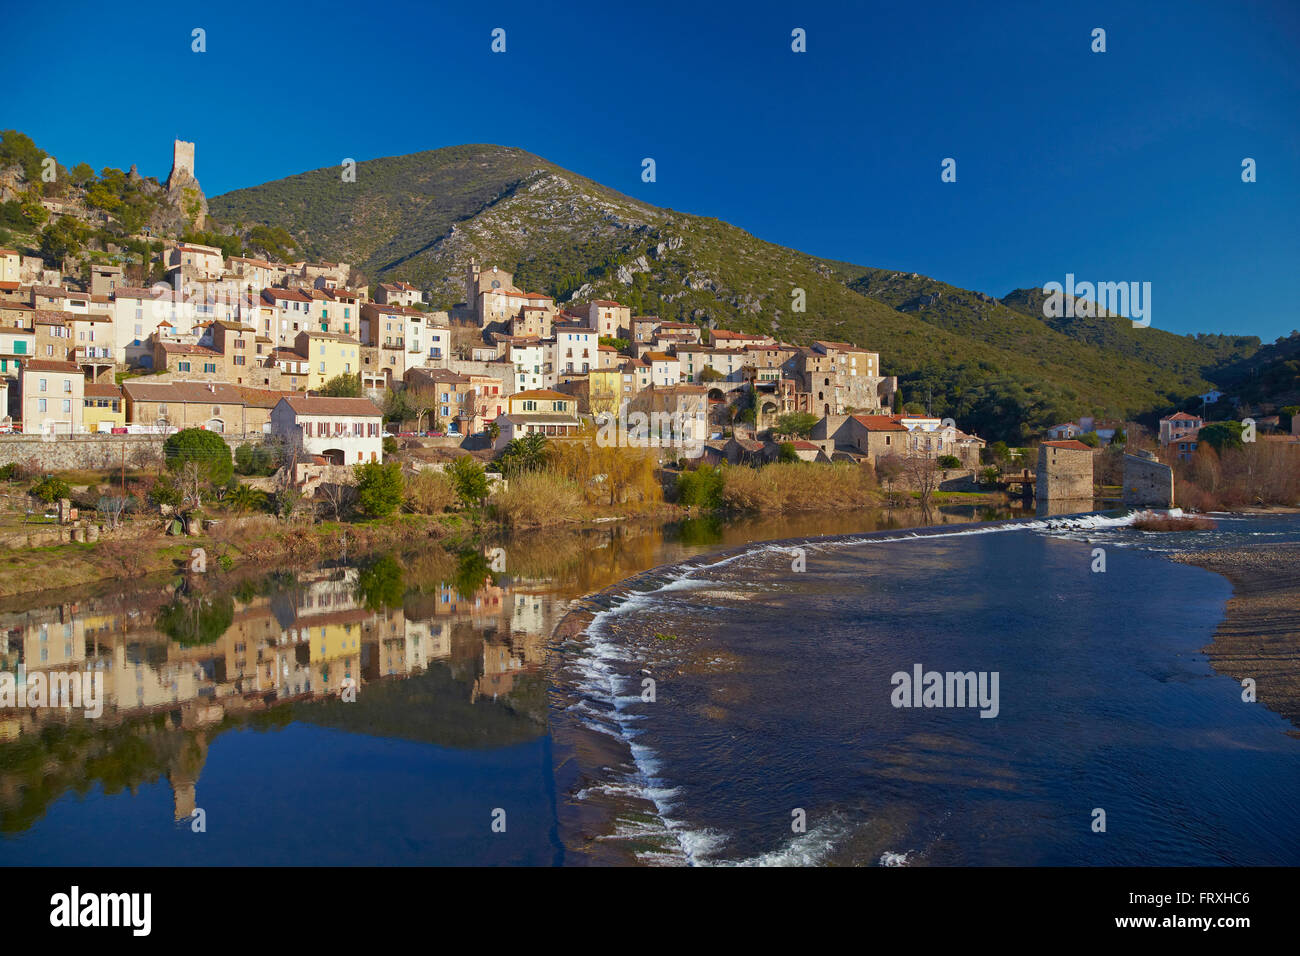 View of Roquebrun, Orb, Dept. Hérault, Languedoc-Roussillon, France, Europe Stock Photo